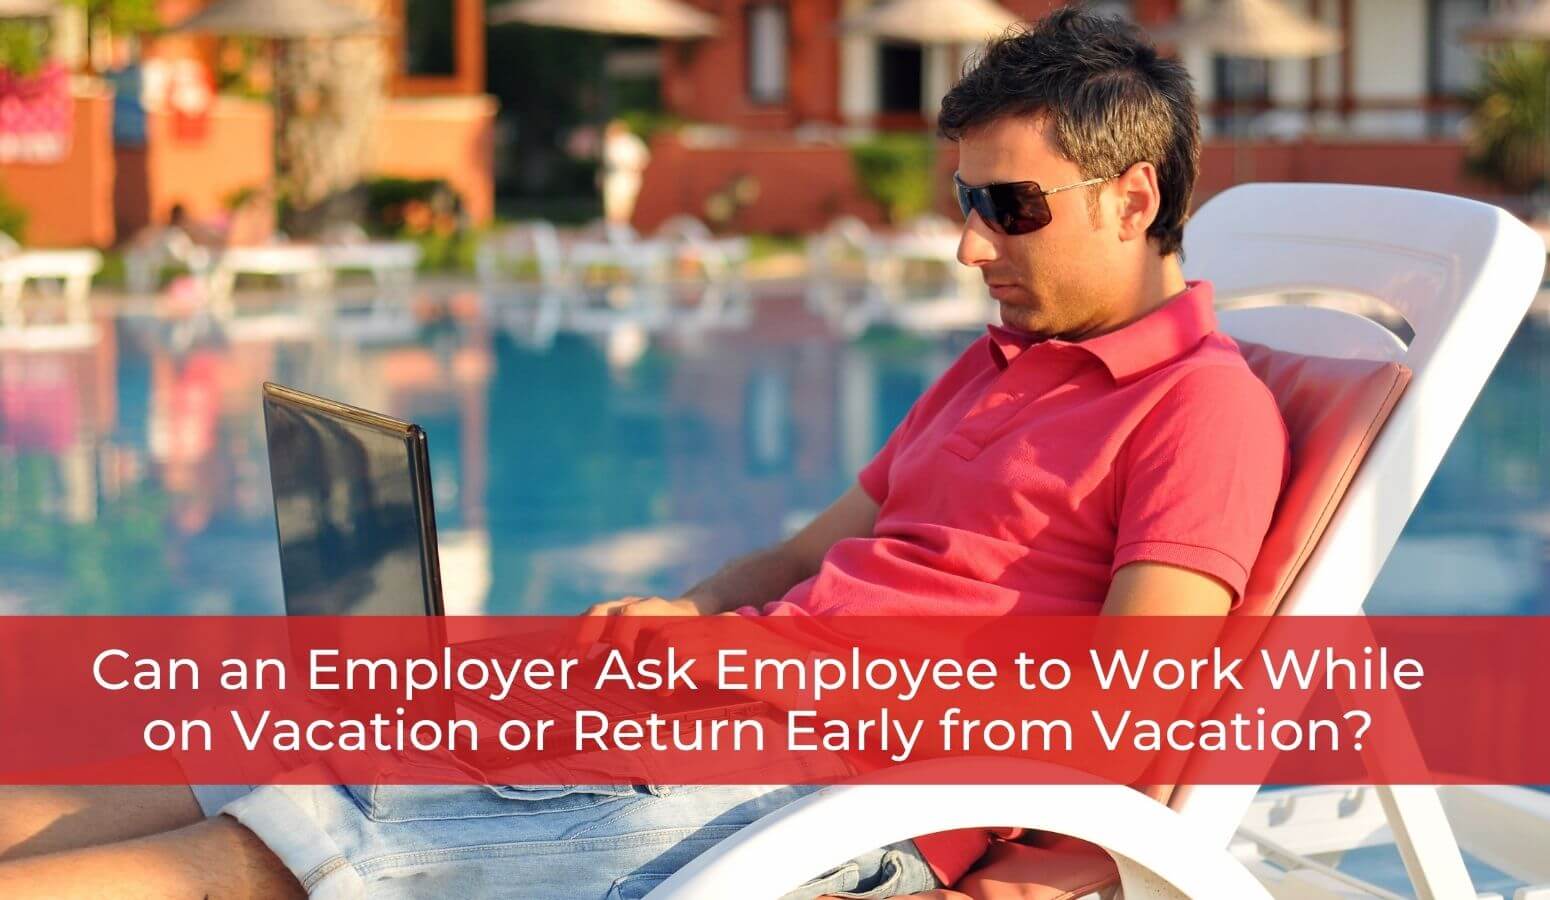 Can an Employer Ask Employee to Work While on Vacation or Return Early from Vacation